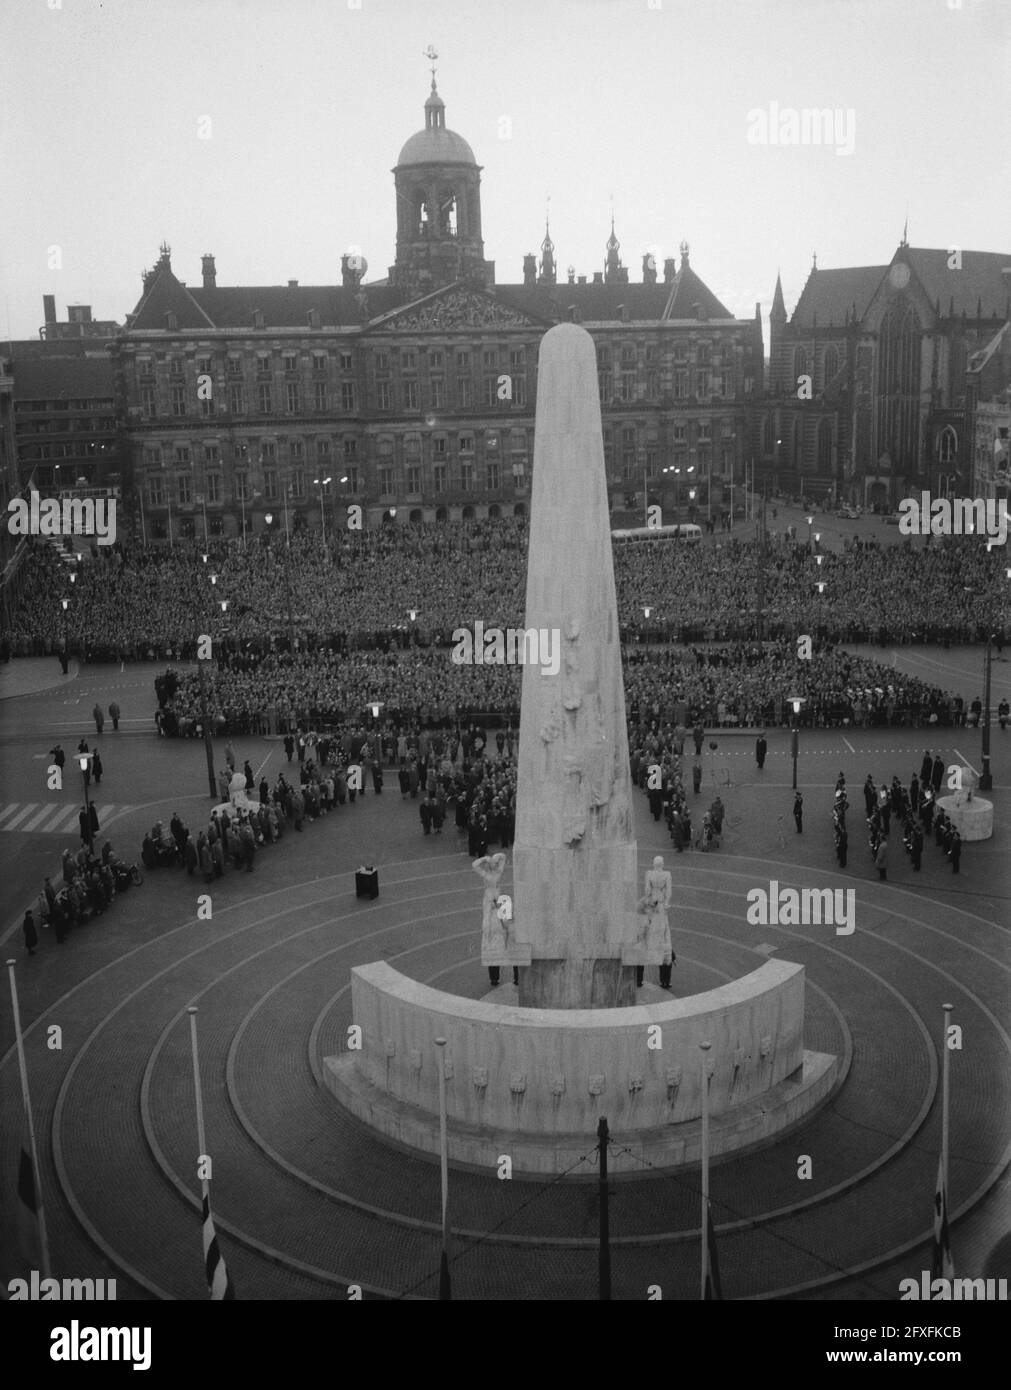 Two minutes of silence on the Dam Square during the commemoration of the fallen of the Second World War, 4 May 1959, The Netherlands, 20th century press agency photo, news to remember, documentary, historic photography 1945-1990, visual stories, human history of the Twentieth Century, capturing moments in time Stock Photo